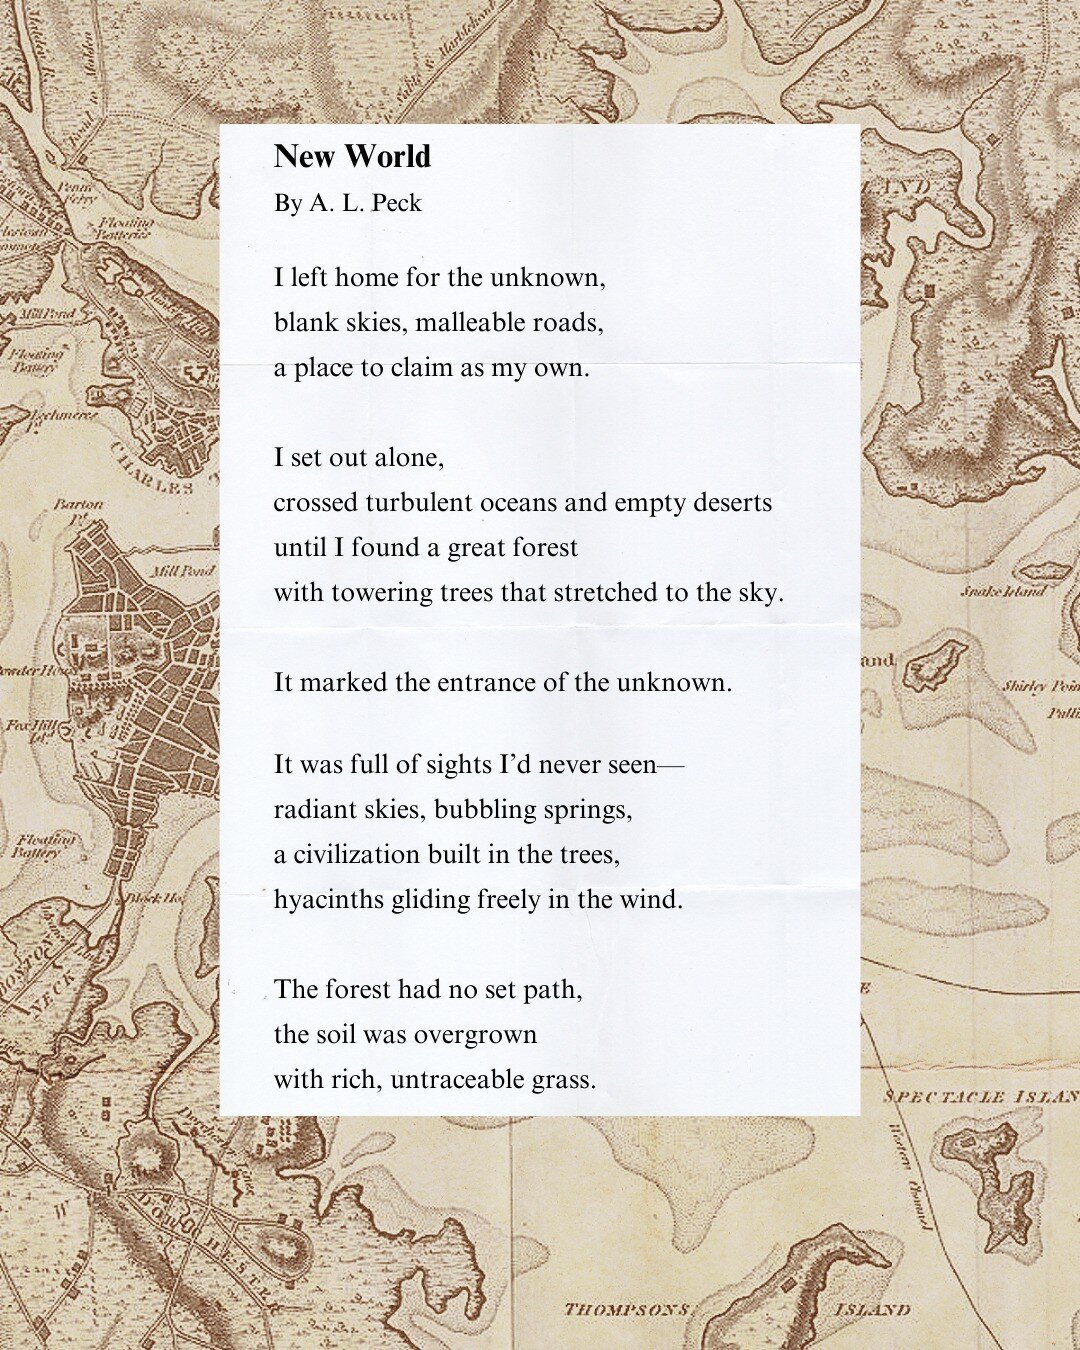 Sometimes we have to leave in order to find our way back. My latest poem, &quot;New World.&quot;
.
.
.
.
.
.
.
.
.
.

#poem&nbsp;#poems&nbsp;#poemsofinstagram&nbsp;#poemsdaily&nbsp;#poemsofig&nbsp;#poemoftheday&nbsp;#poet&nbsp;#poetry&nbsp;#poetrycom